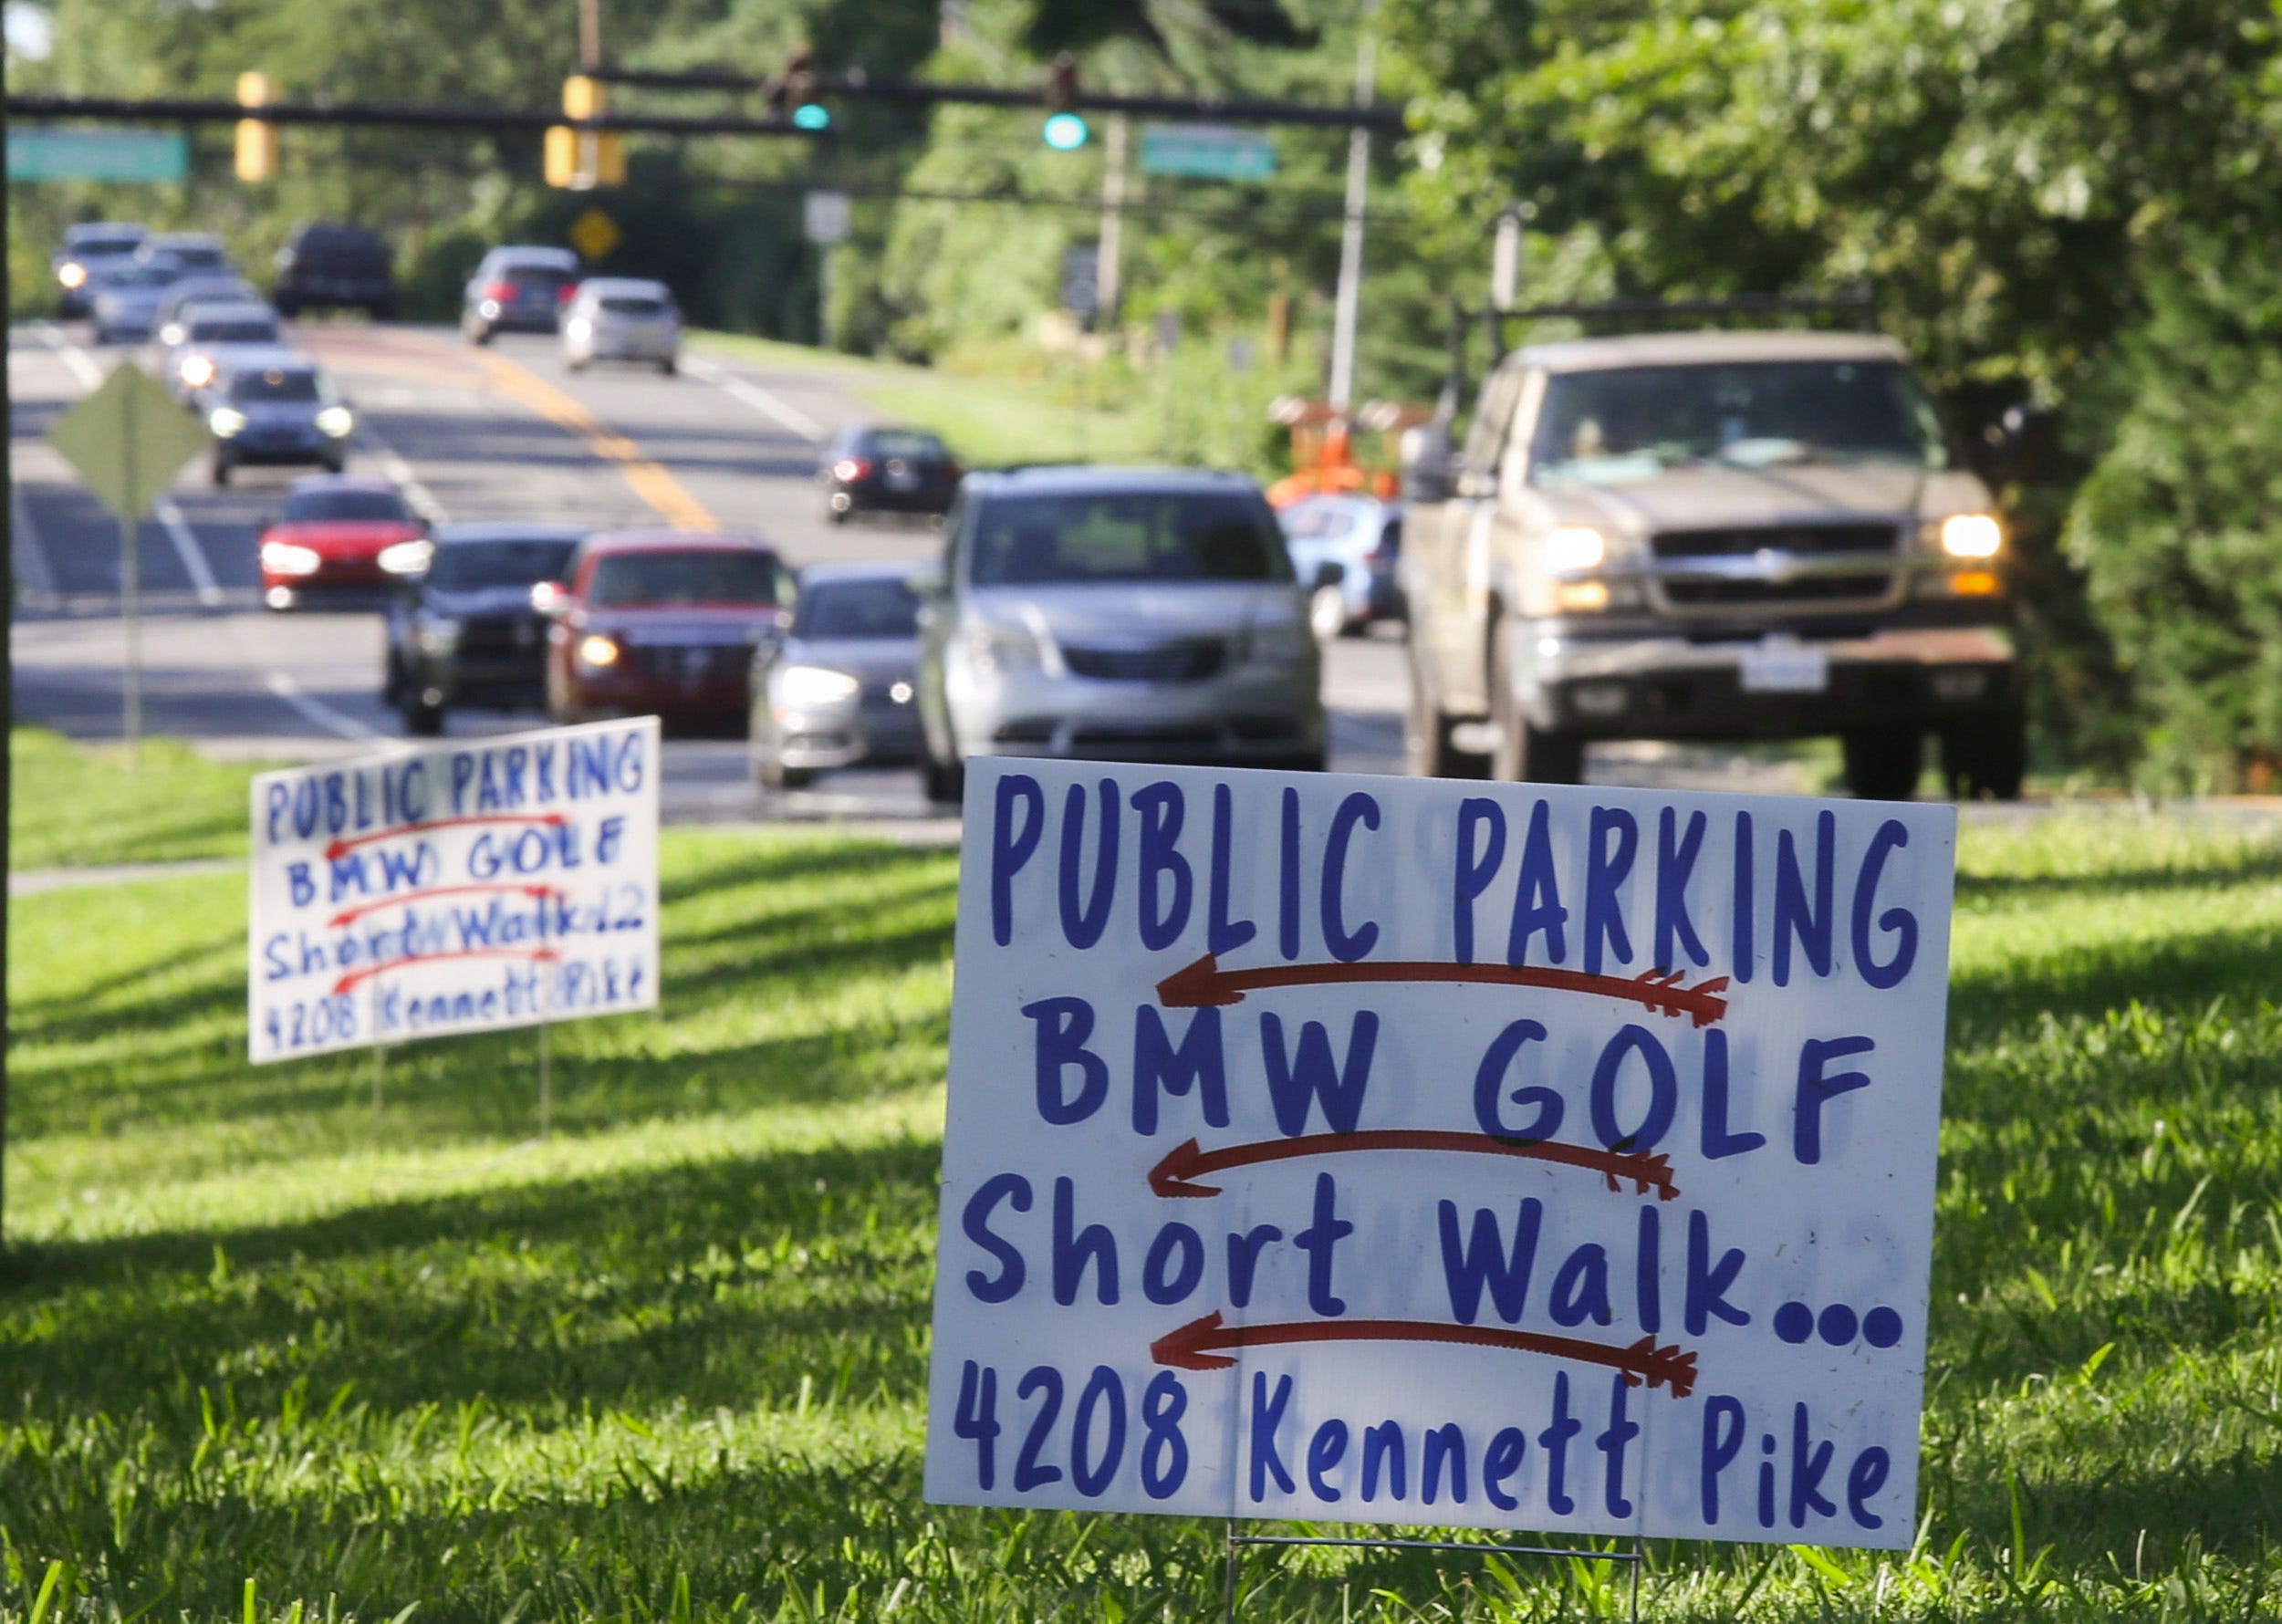 More than 100,000 golf fans are headed to northern Delaware this week. Here’s how to get around